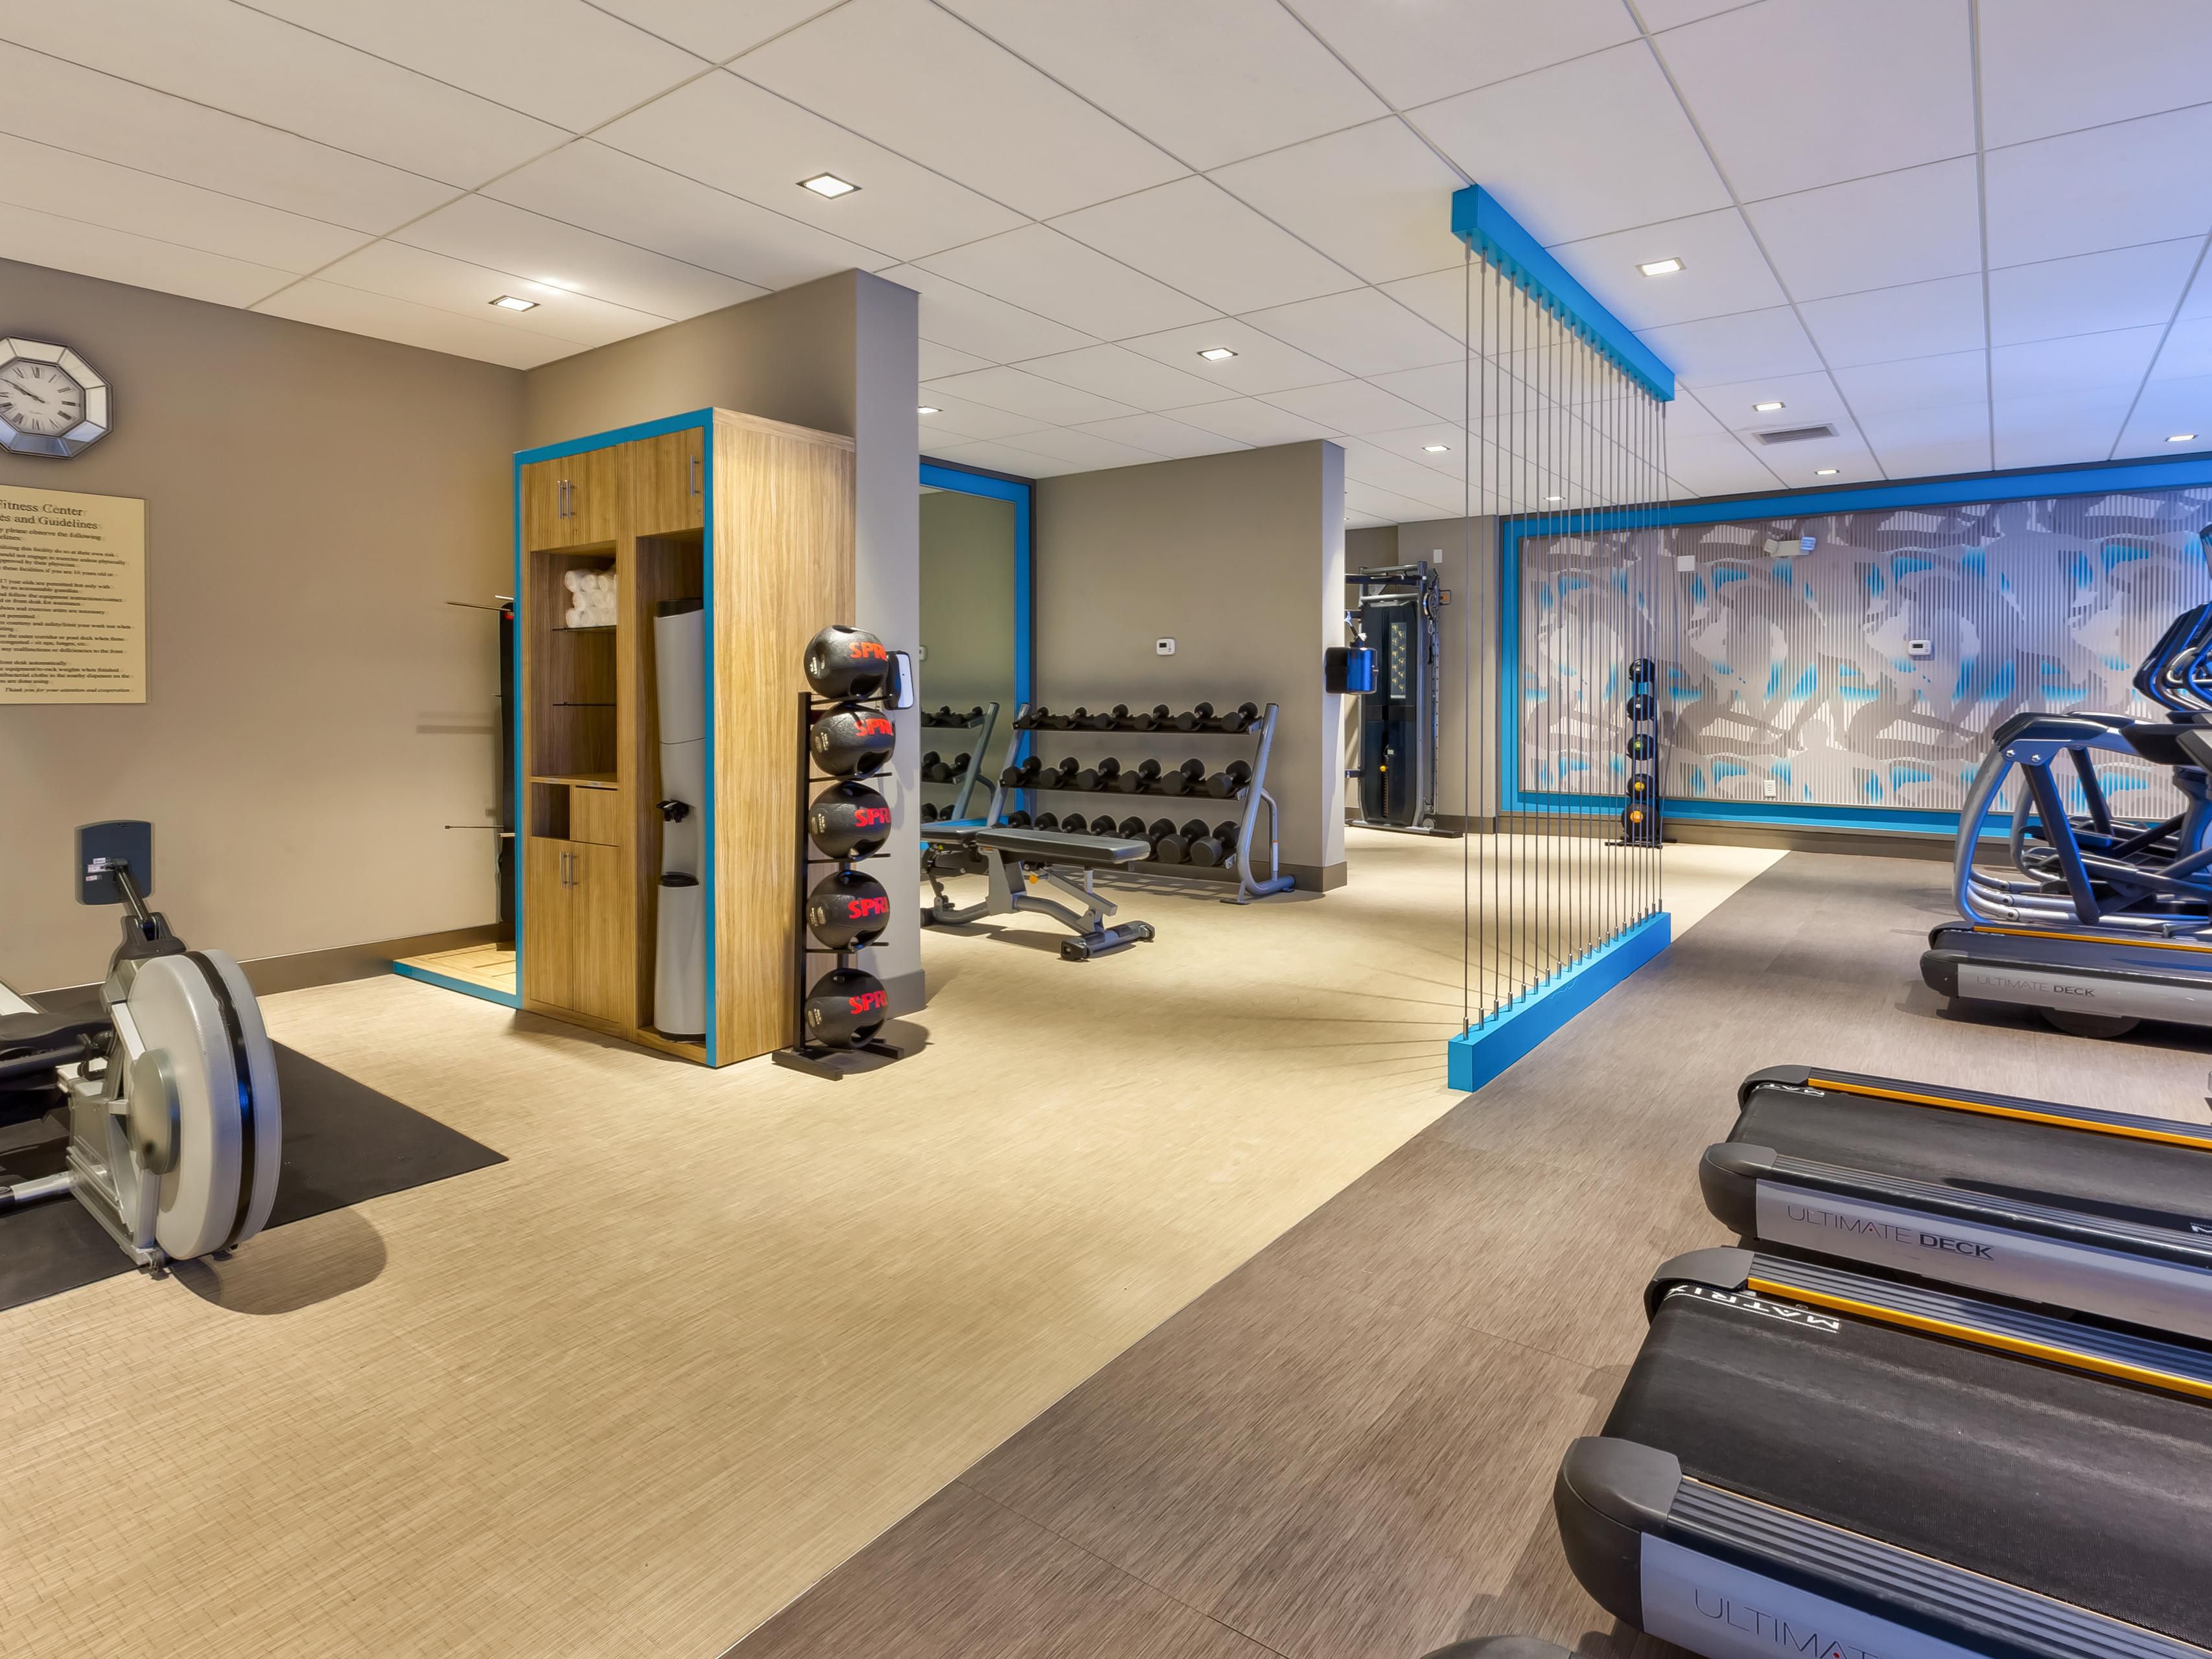 Whether you prefer the stair stepper's intensity, the versatility of elliptical machines, or the endurance challenge of a treadmill, our 24-hour fitness center has you covered. Sculpt and strengthen with free weights or enjoy a low-impact ride on our stationary bicycle. Get ready to get fit.